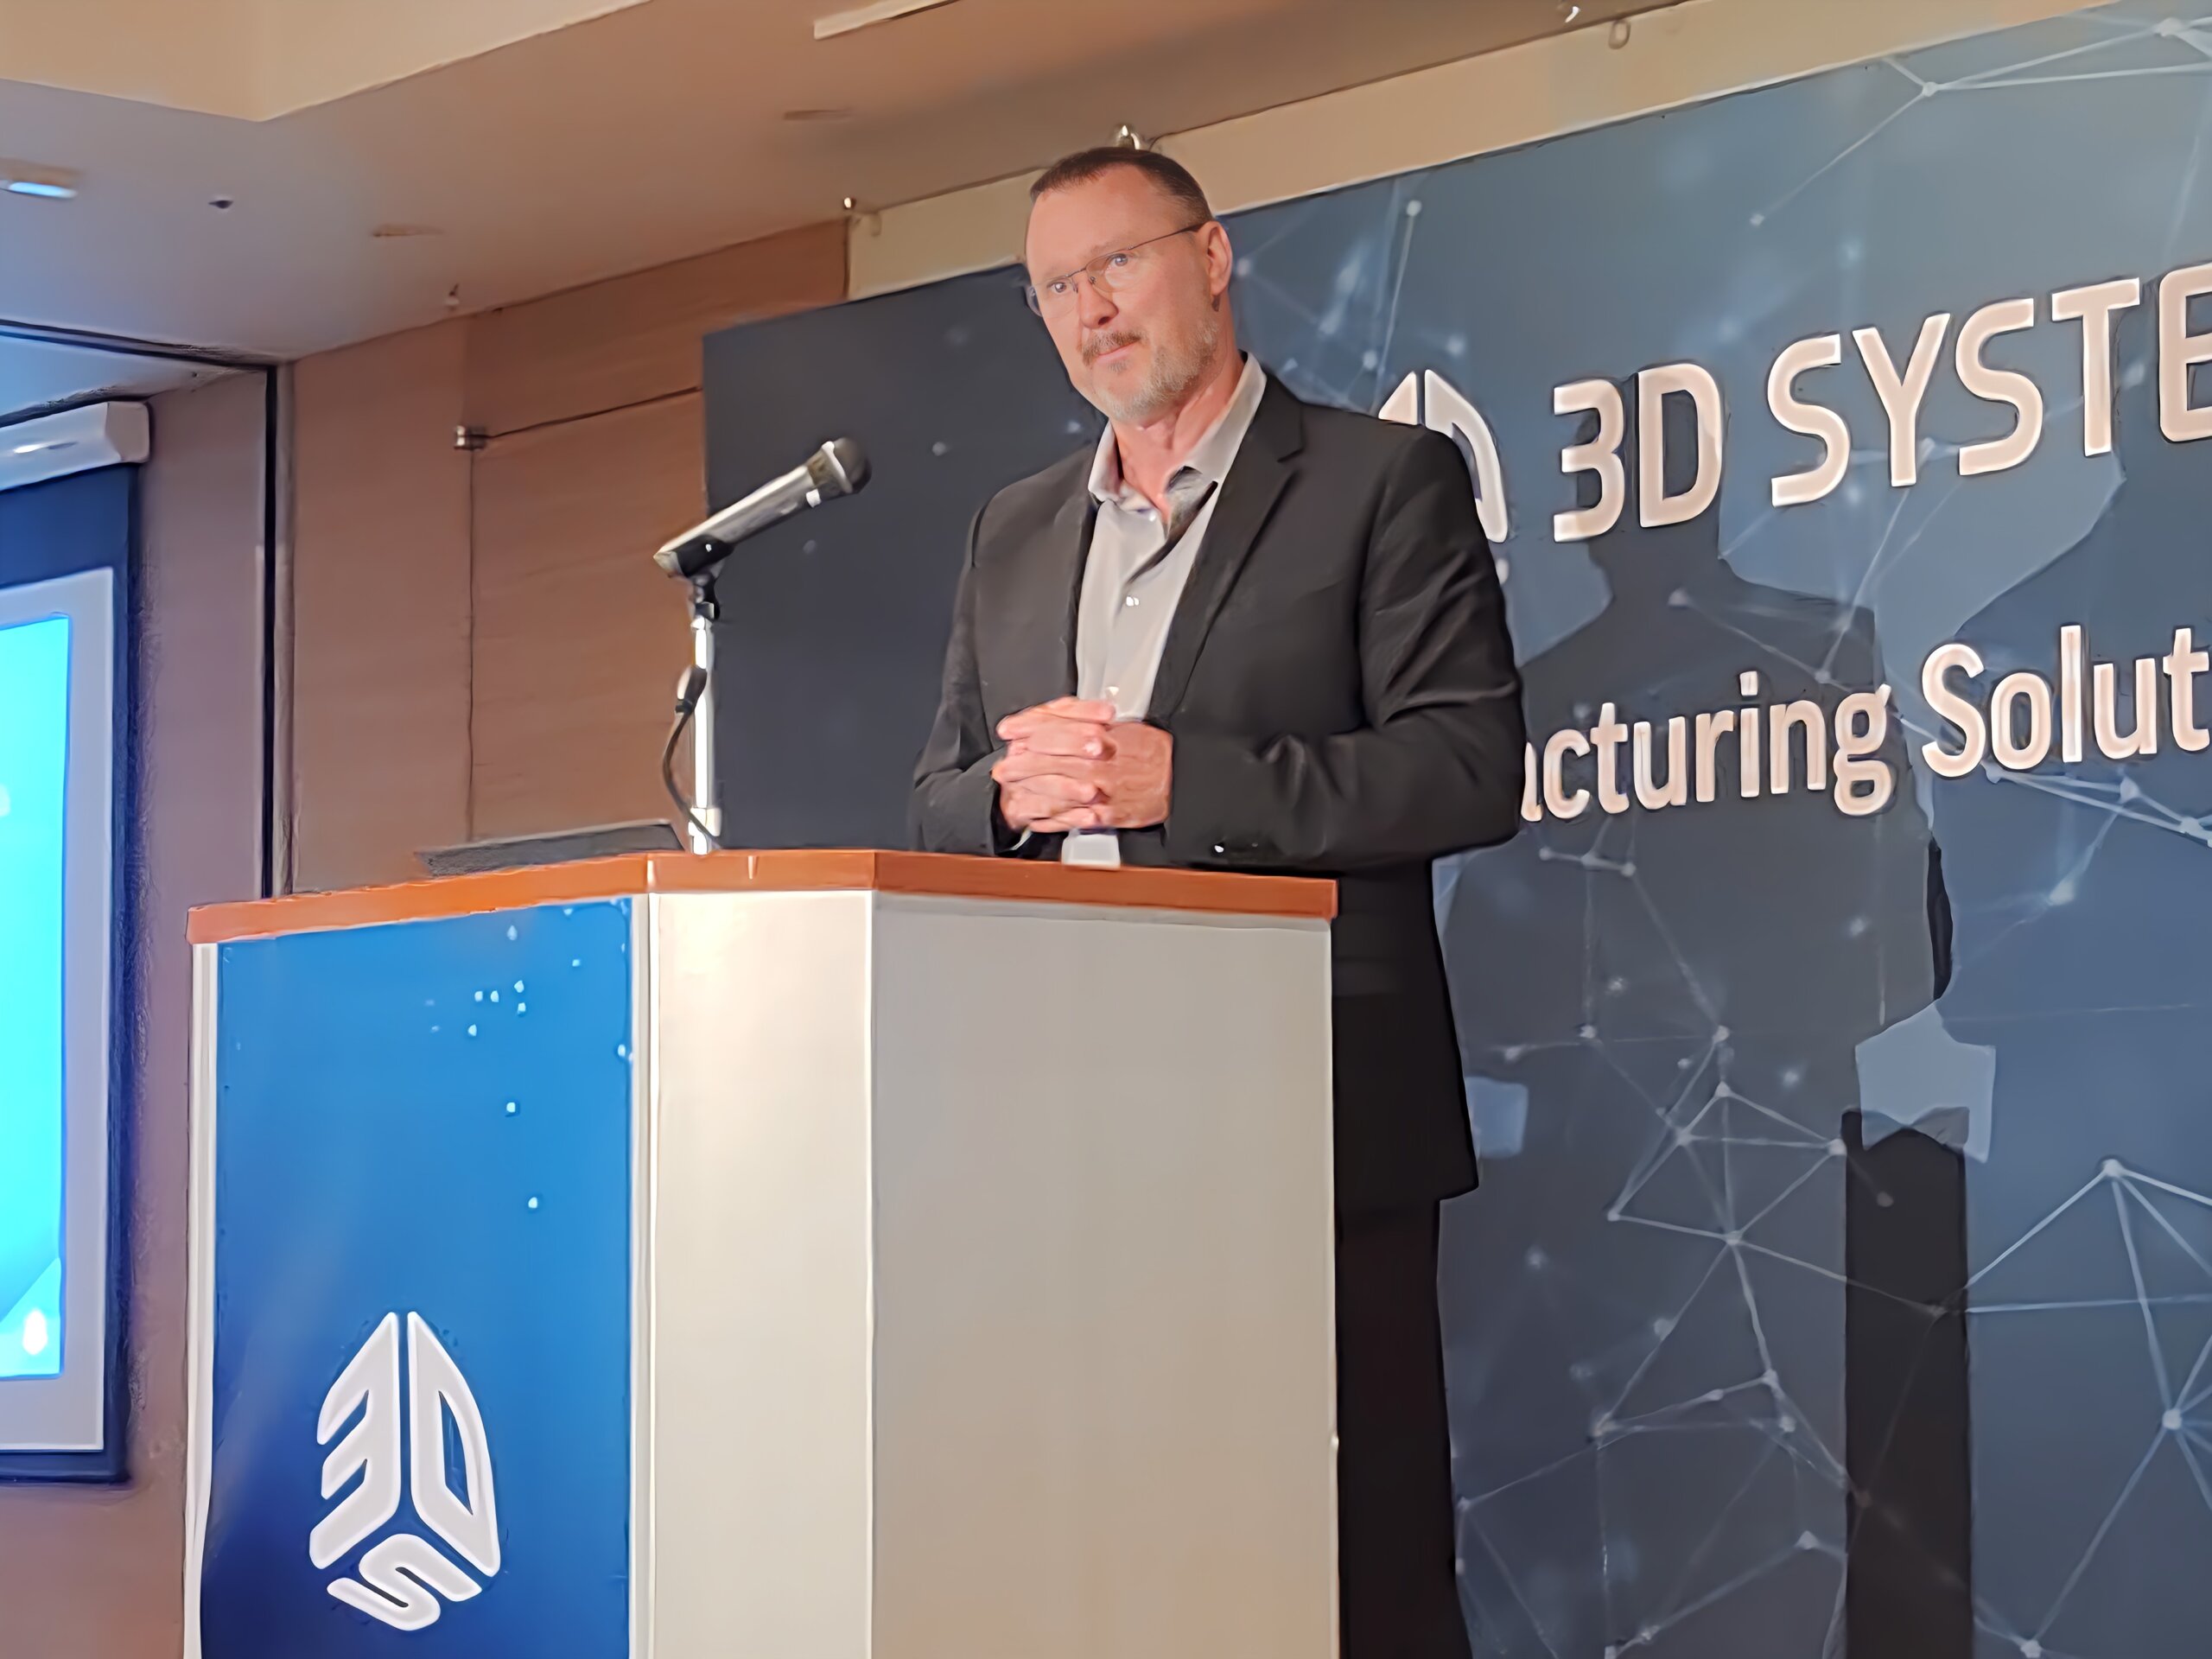 3D Systems社　新3Dプリンター製品4機種の国内発売を発表